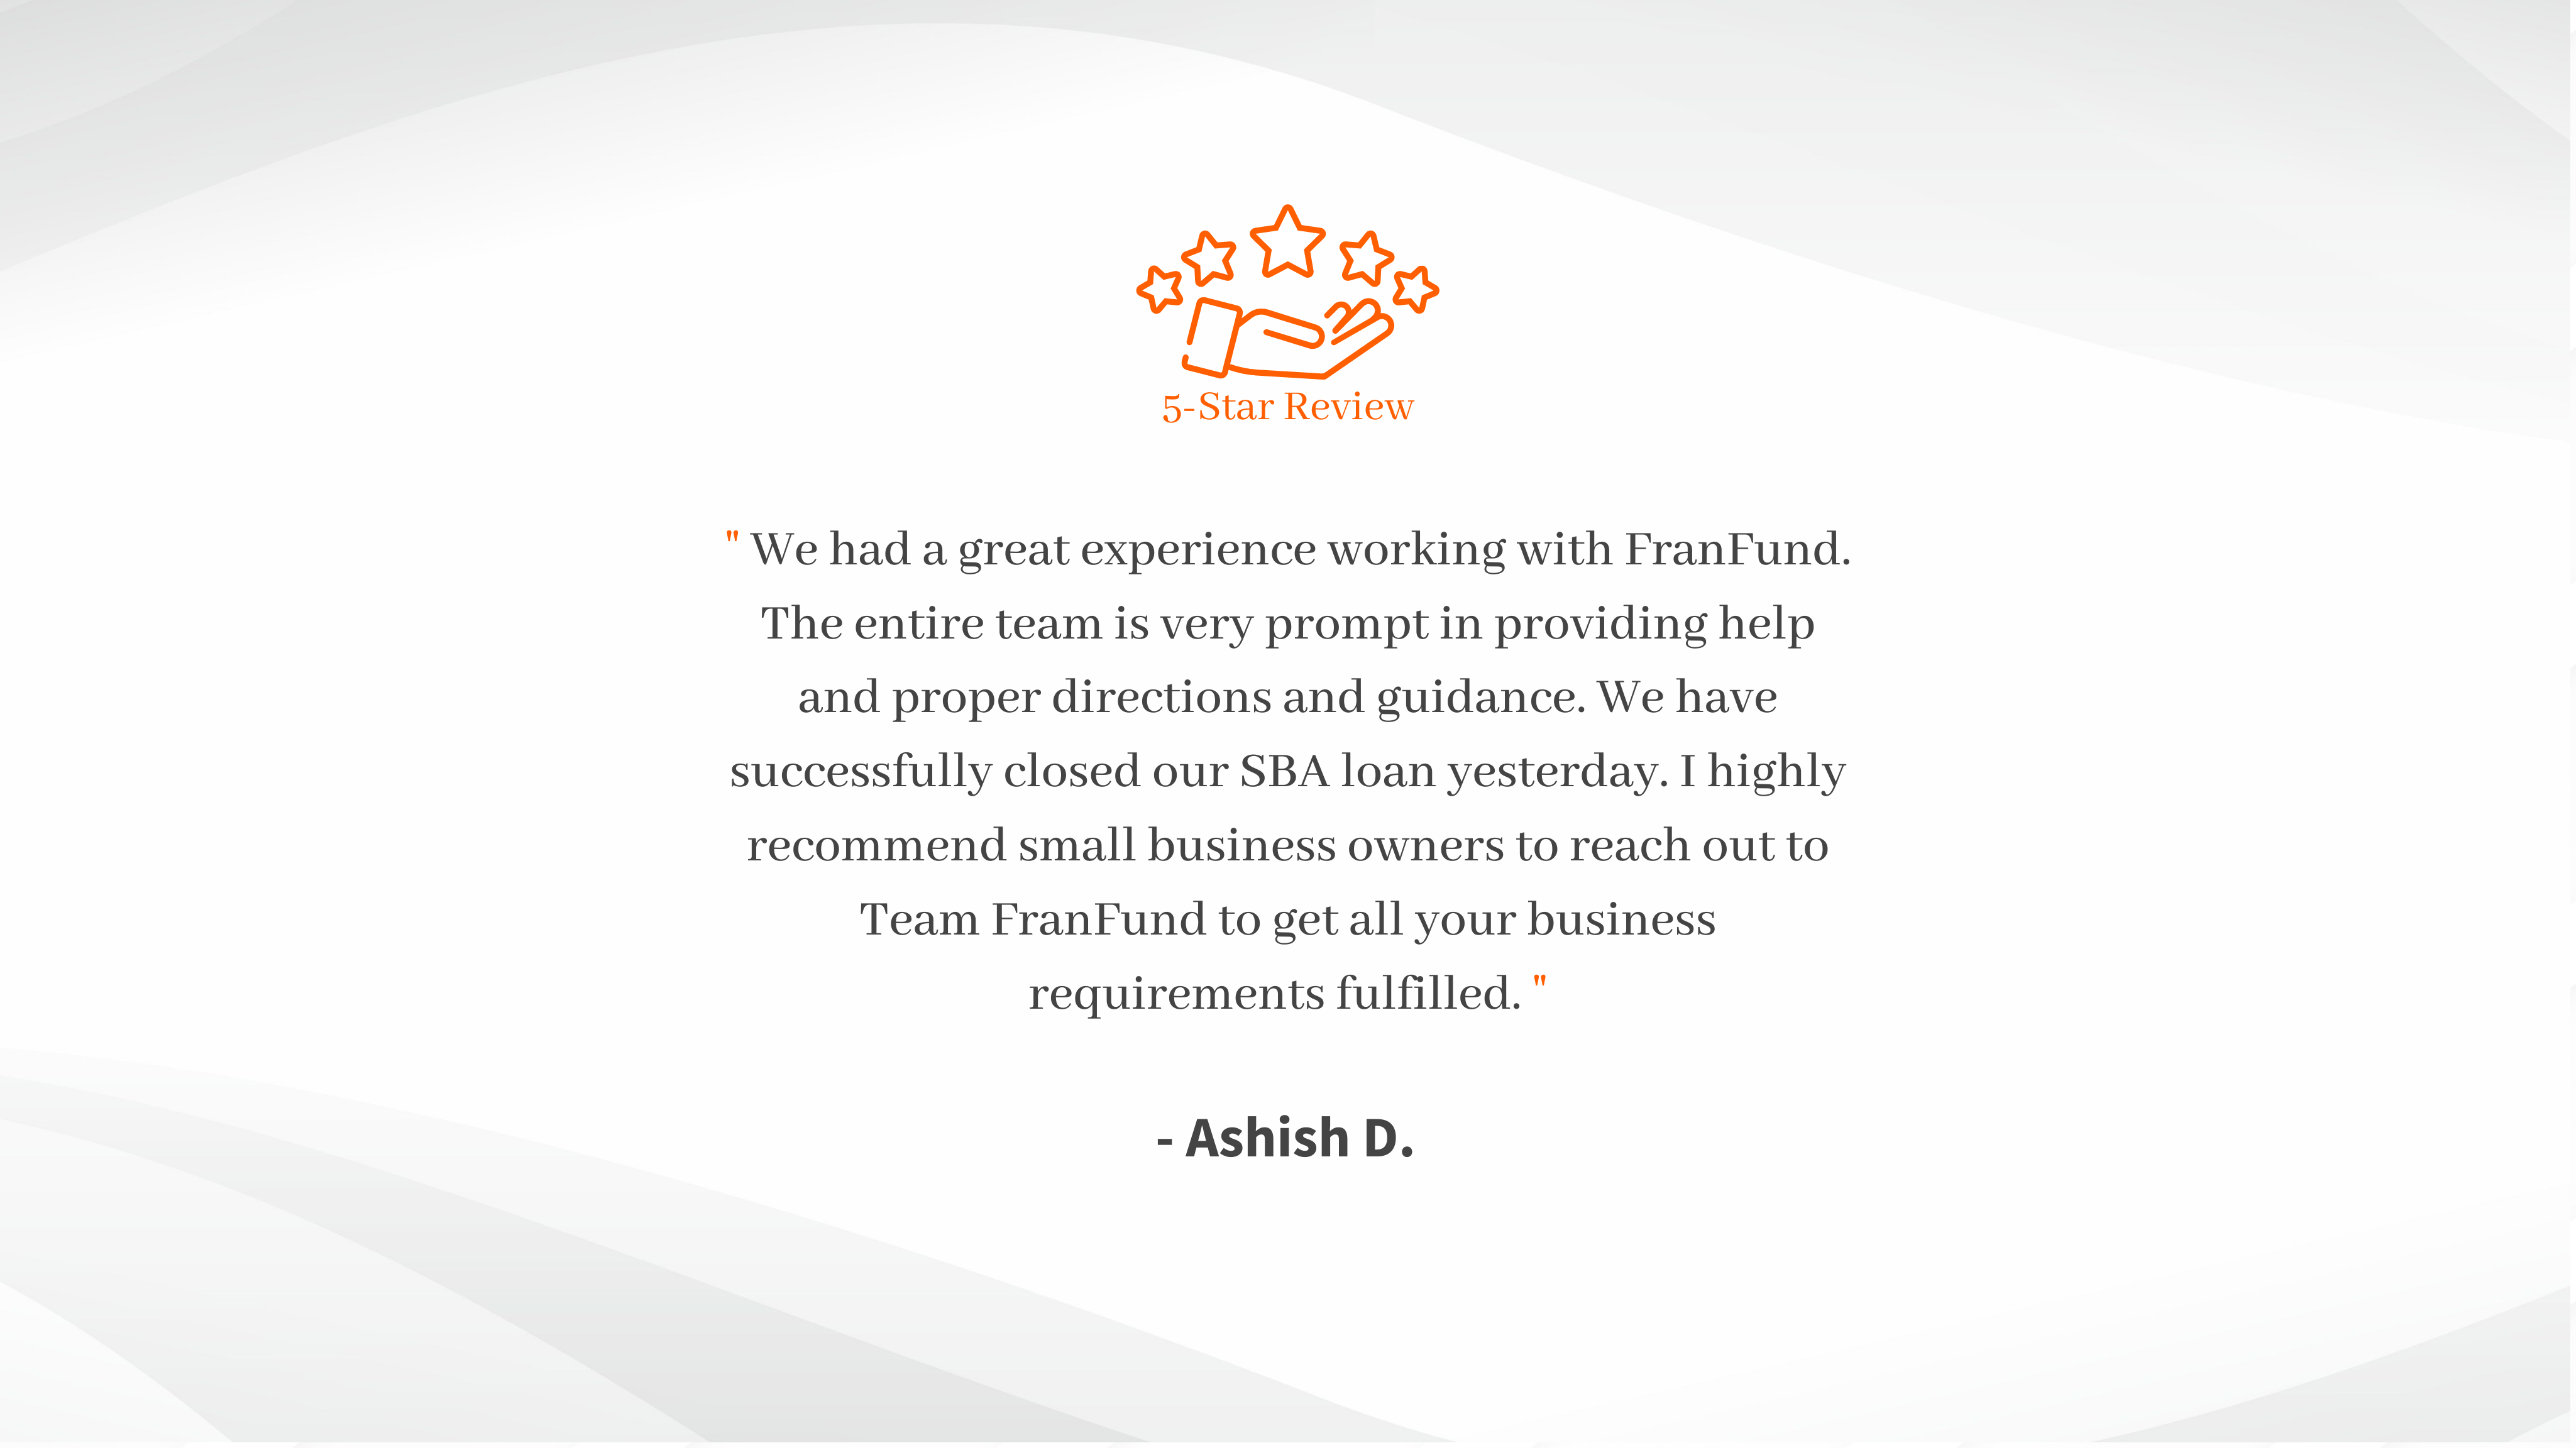 Working with FranFund was a fantastic experience. Their expertise in the franchise funding arena as well as the guidance provided throughout the process were invaluable. I would highly recommend FranFund t (10)